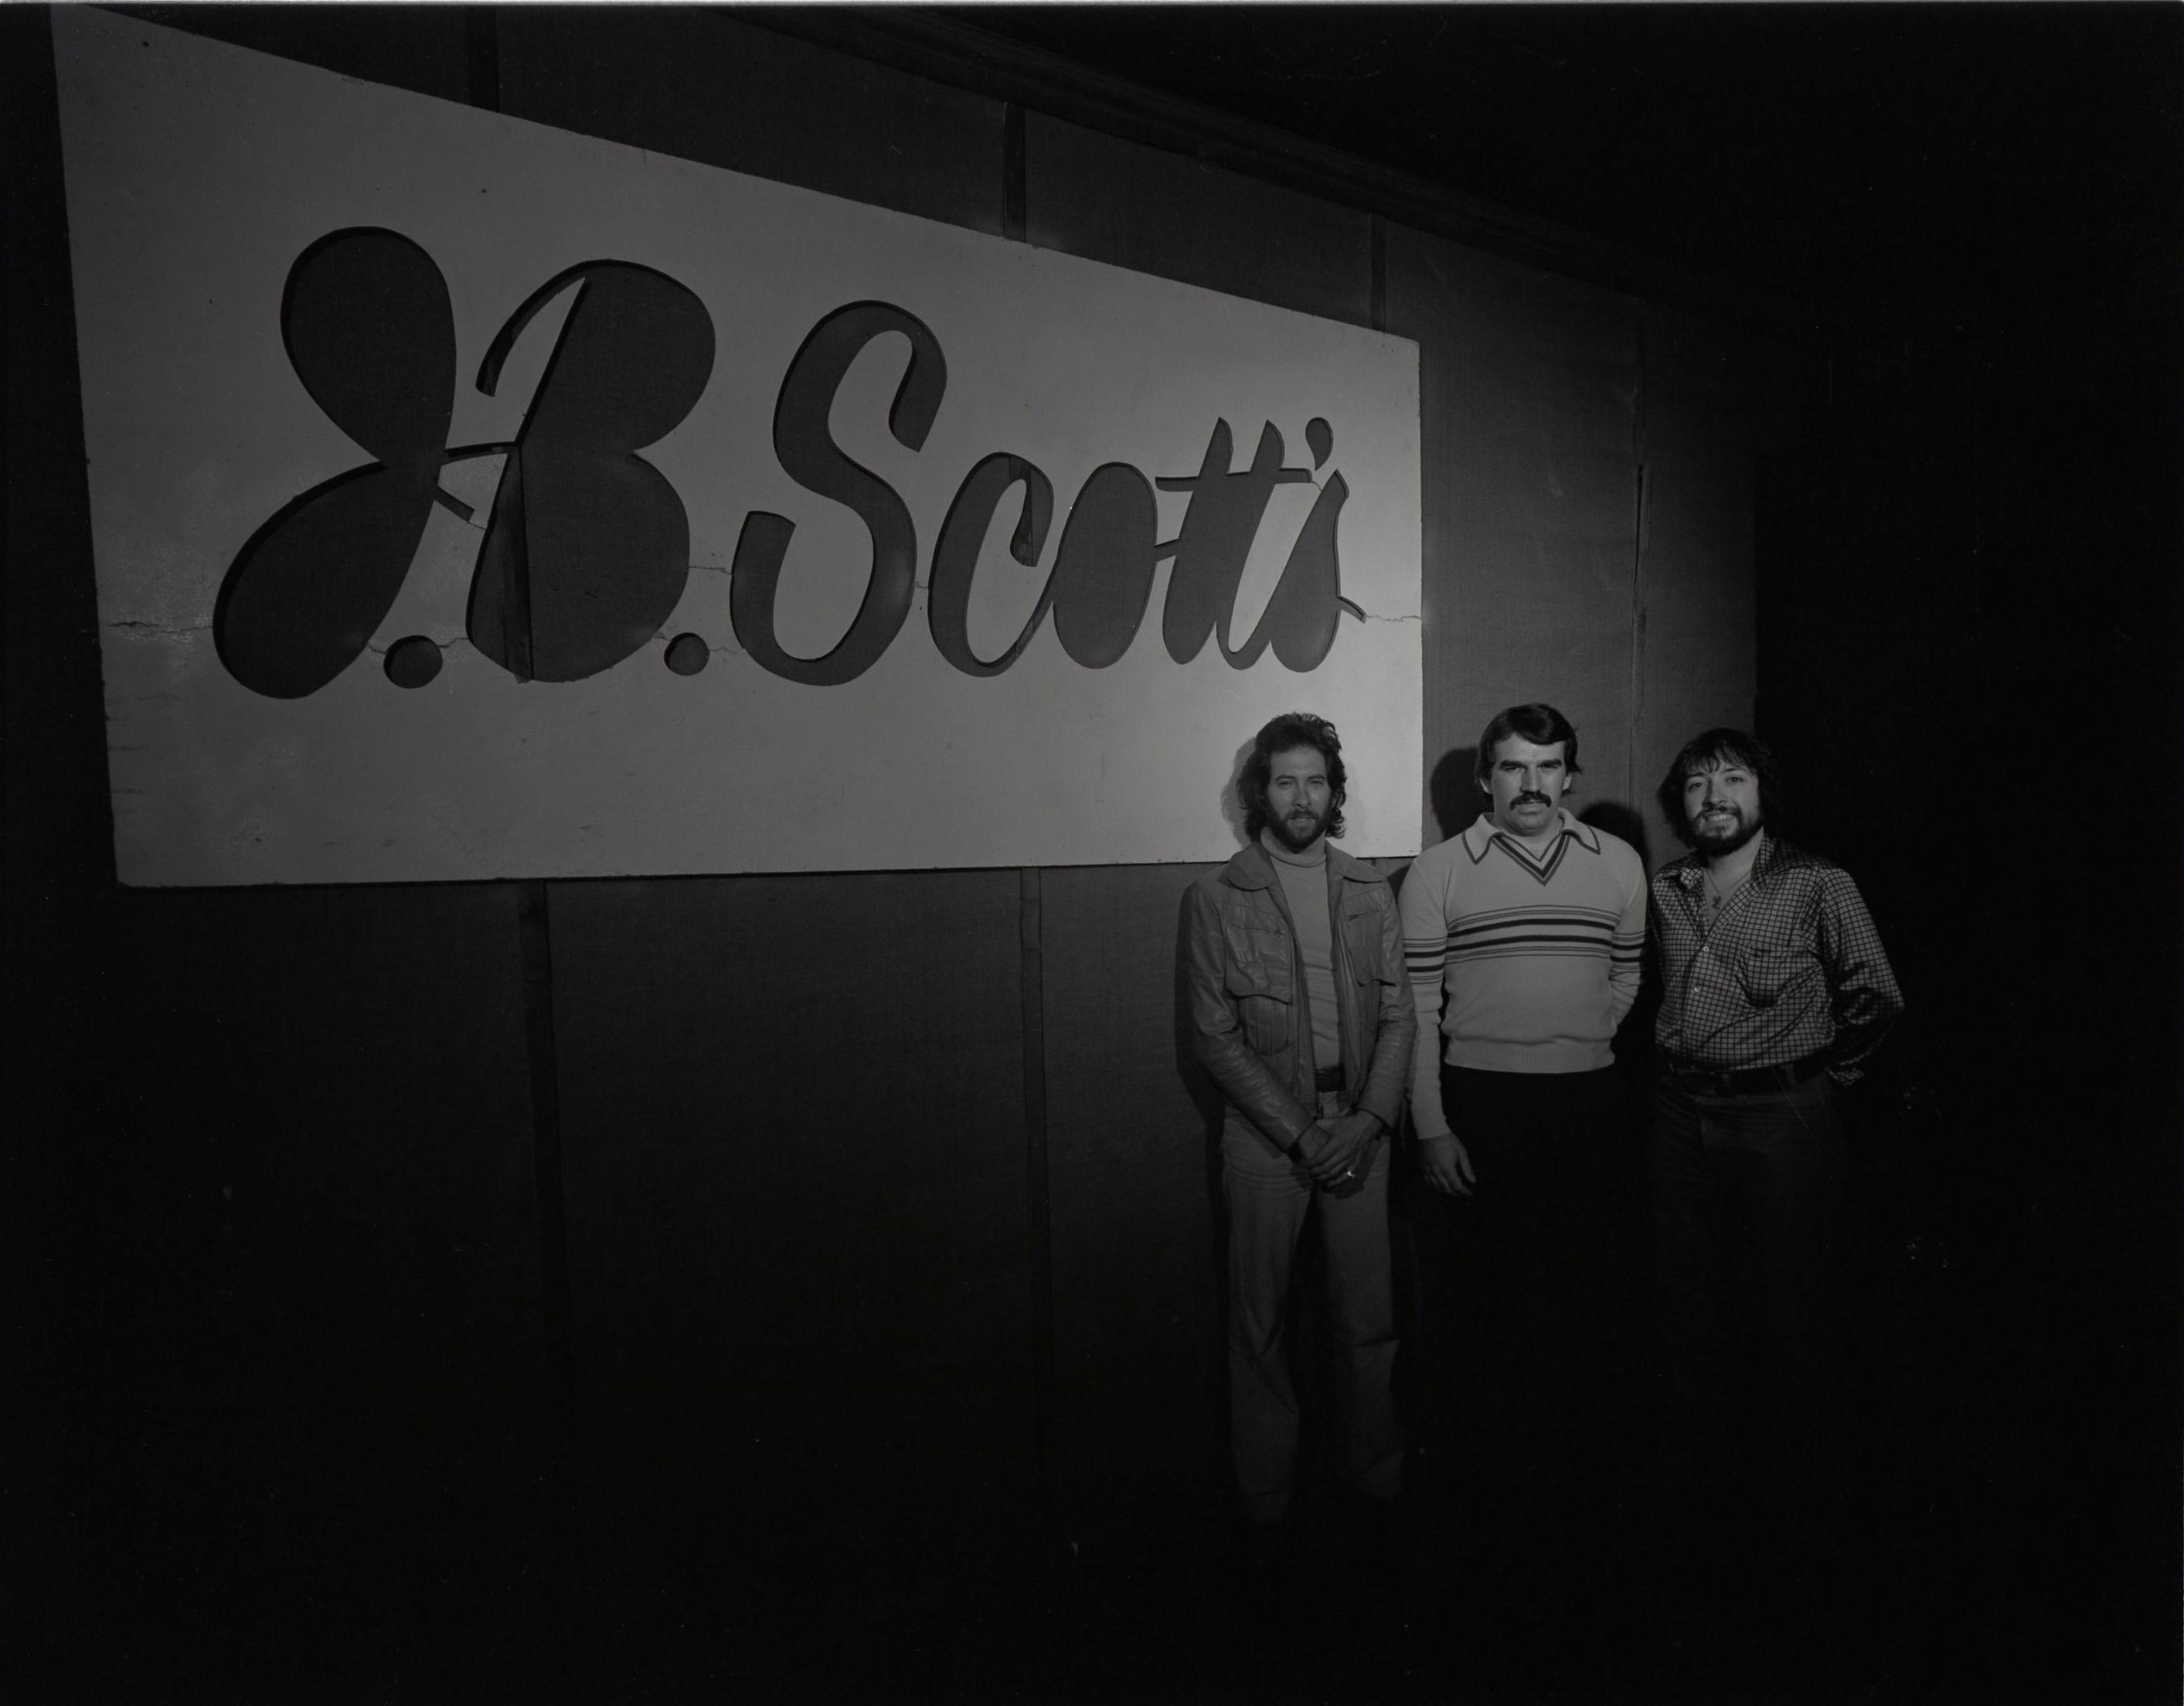 a black and white photo in which three men are standing in front of the J.B. Scott's sign.